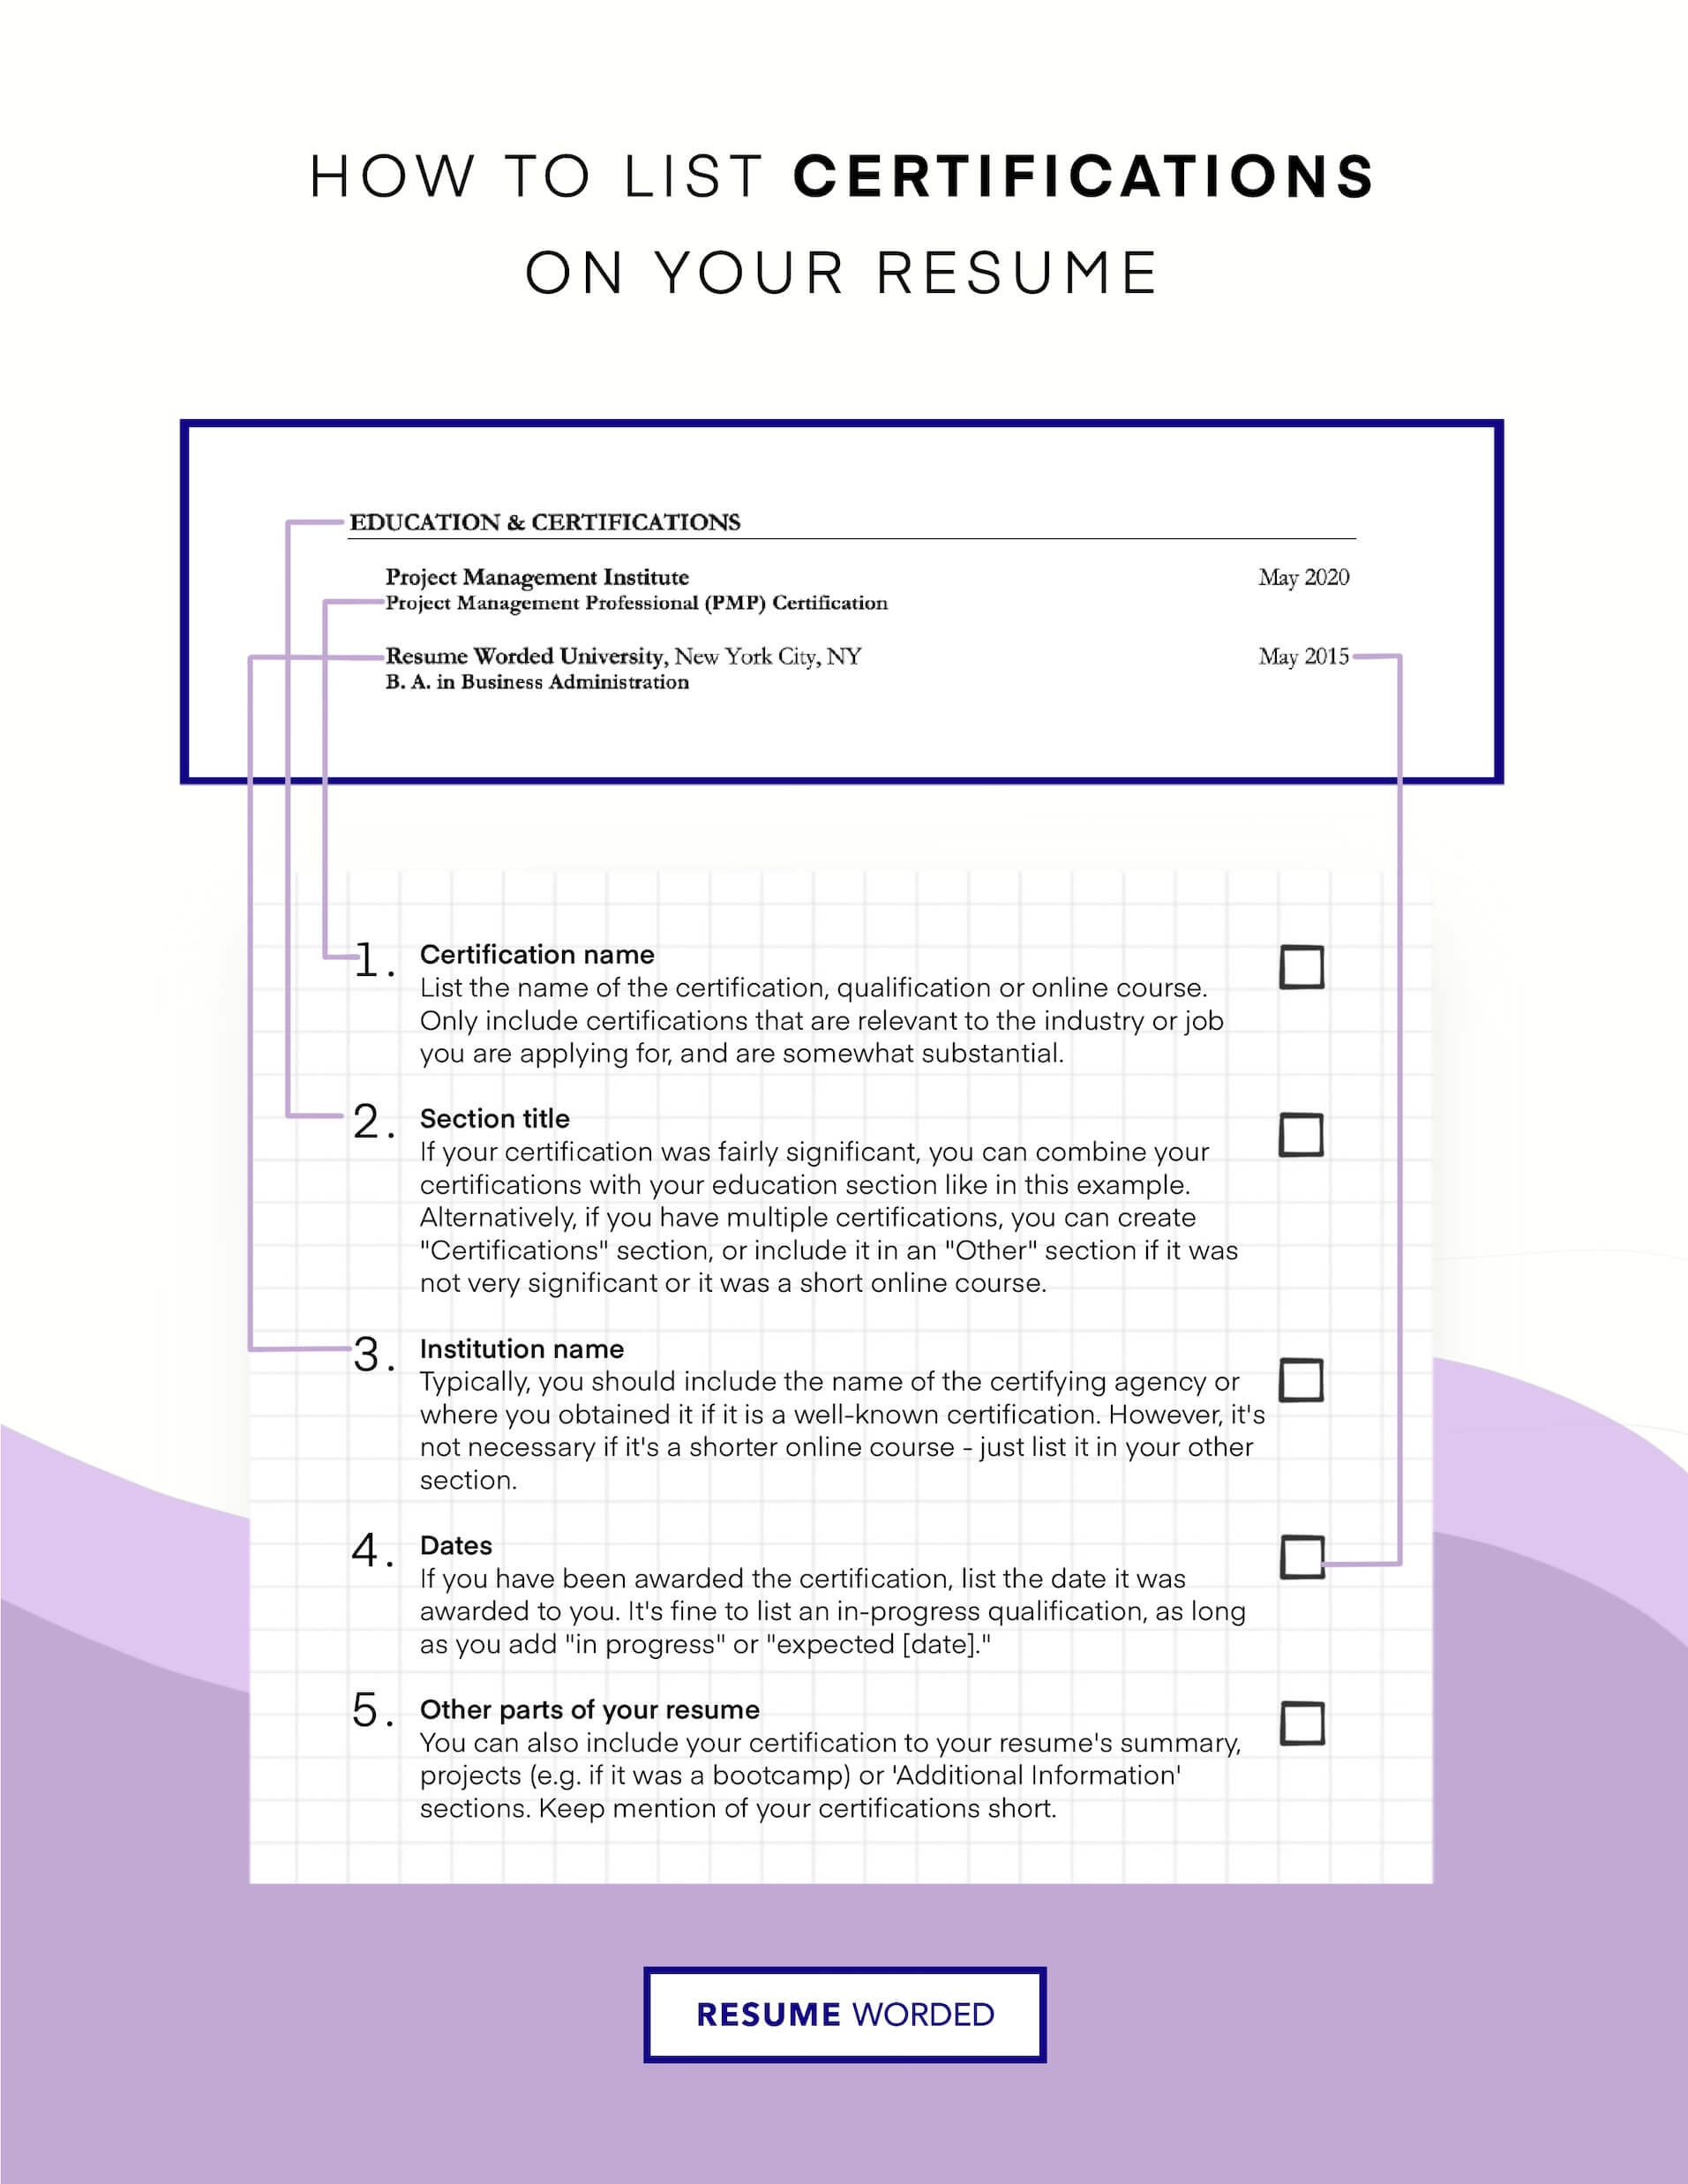 Differentiate your resume with speciality certifications or licenses - Entry Level Dental Assistant Resume